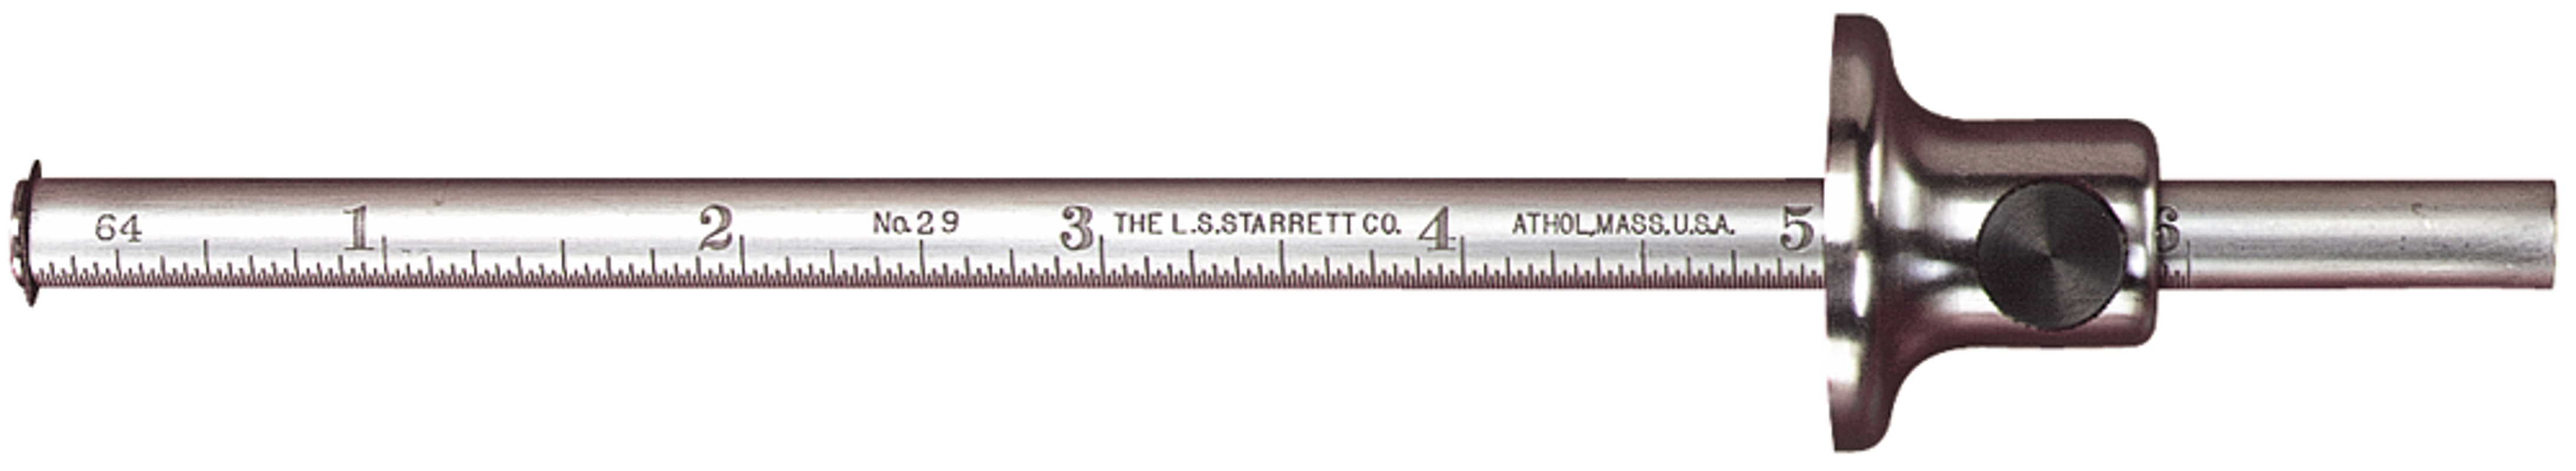 Starrett Scriber 70A With Hardened Steel Point, 2-3/8 Point